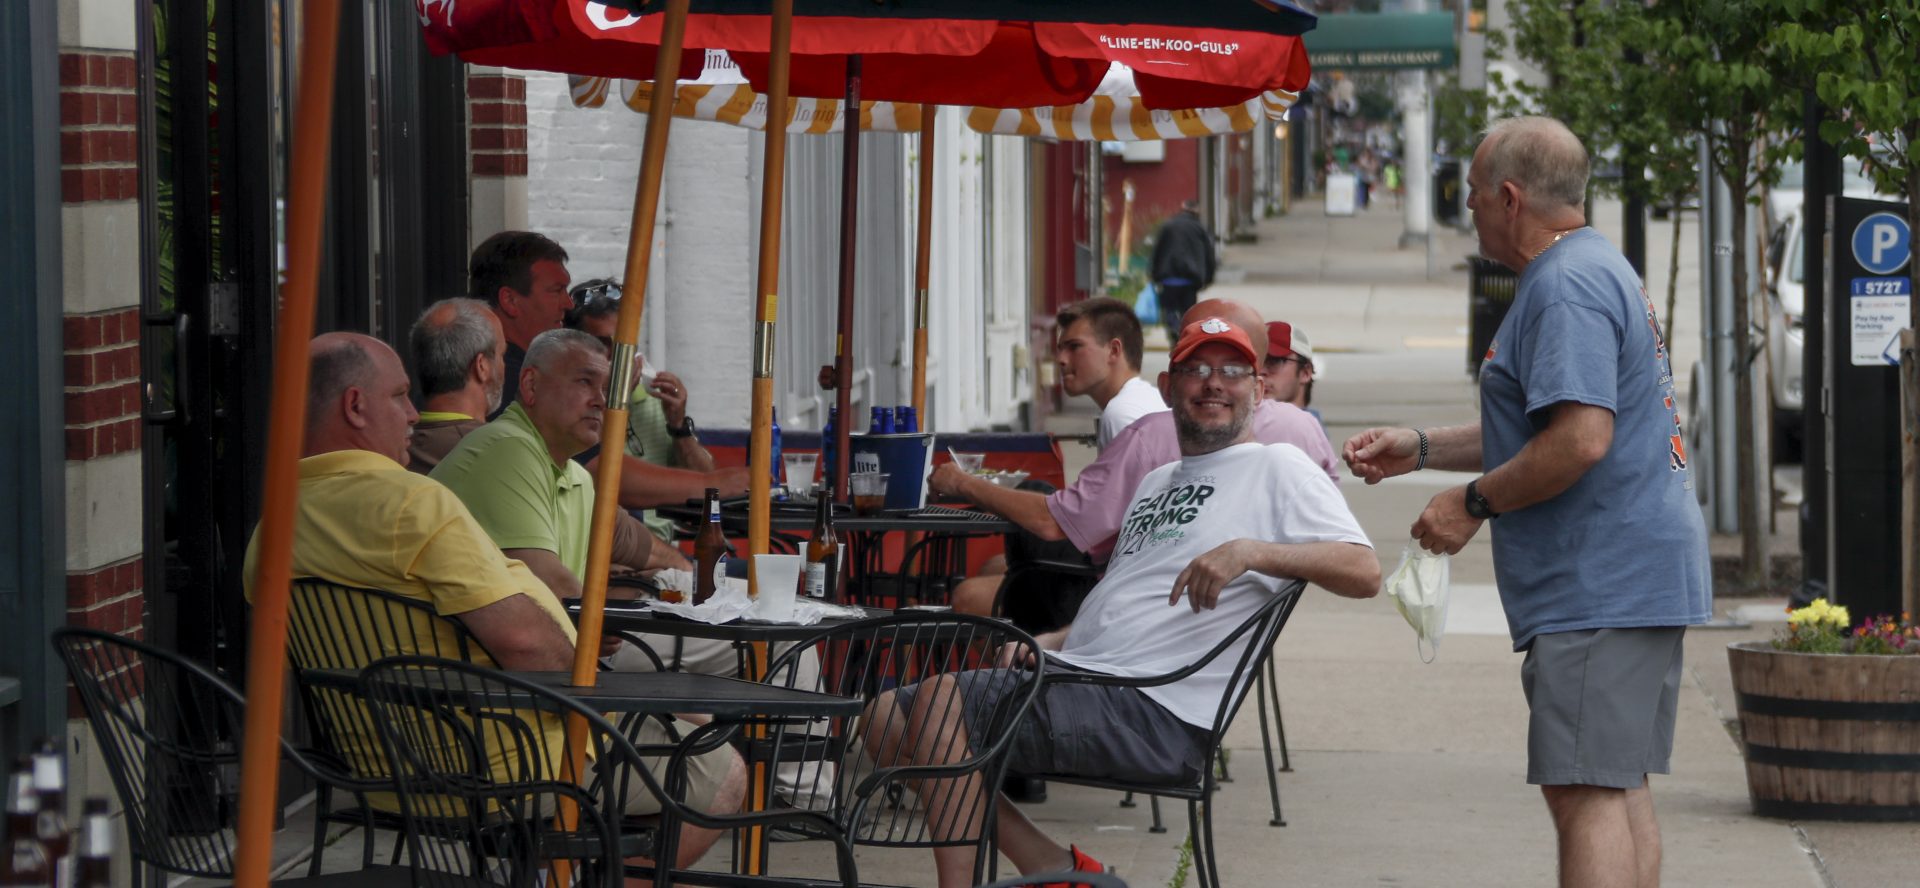 People take advantage of newly lowered COVID-19 protective restrictions in most of southwest Pennsylvania and have food and drinks on the sidewalk on the re-opening day for seated patrons at an eatery on Pittsburgh's Southside, Friday, June 5, 2020.